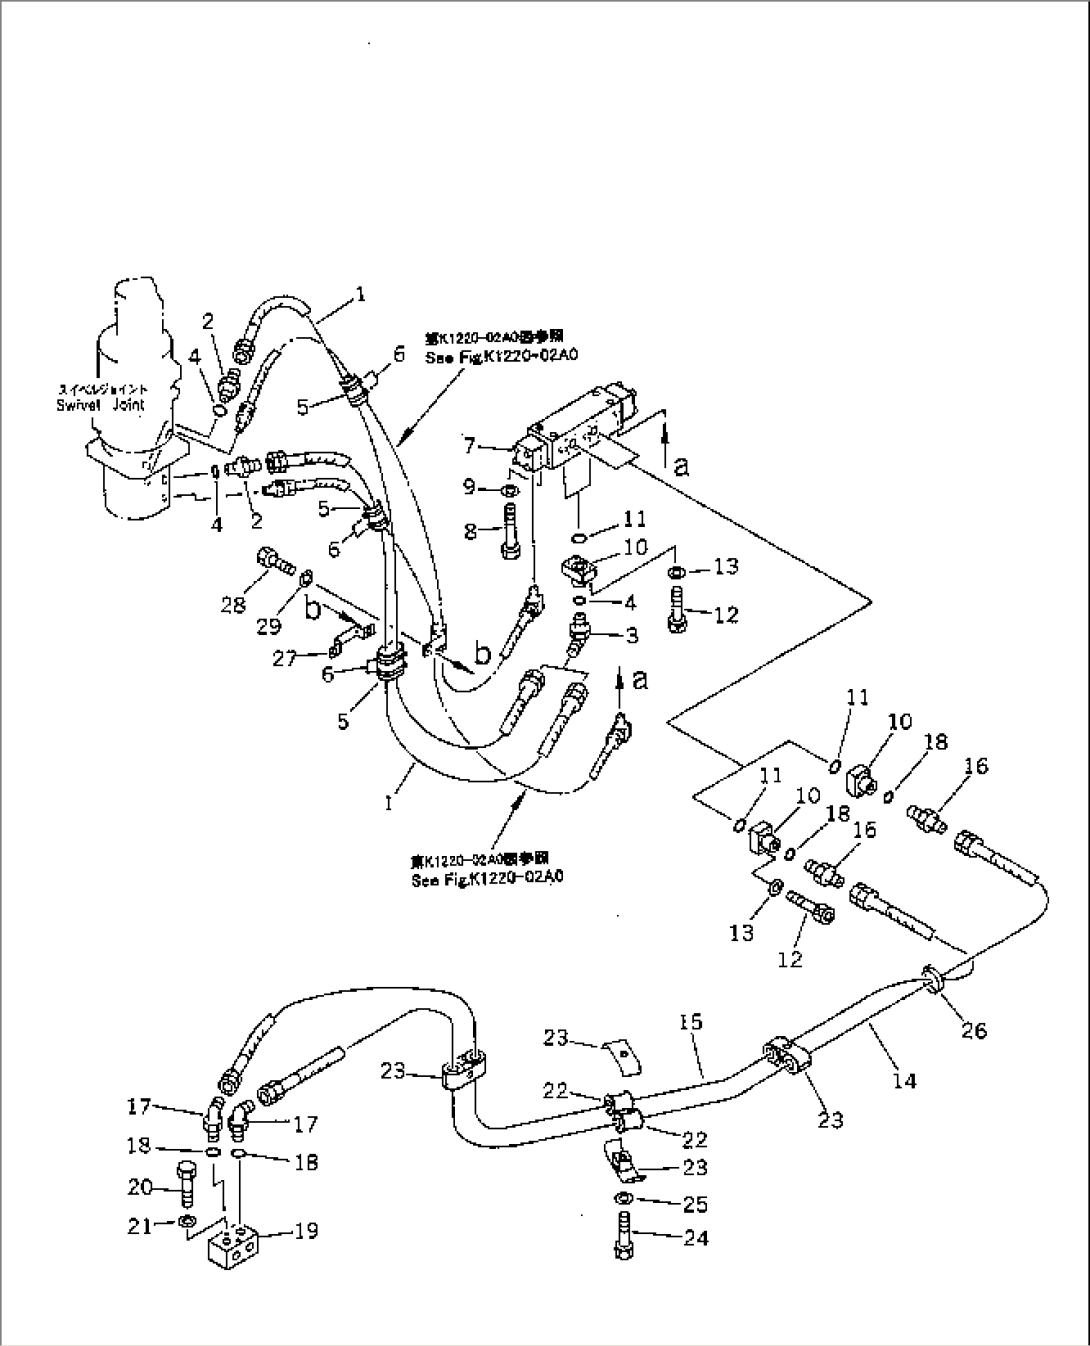 OUTRIGGER PIPING (WITH INDEPENDENT FRONT/REAR OUTRIGGER)